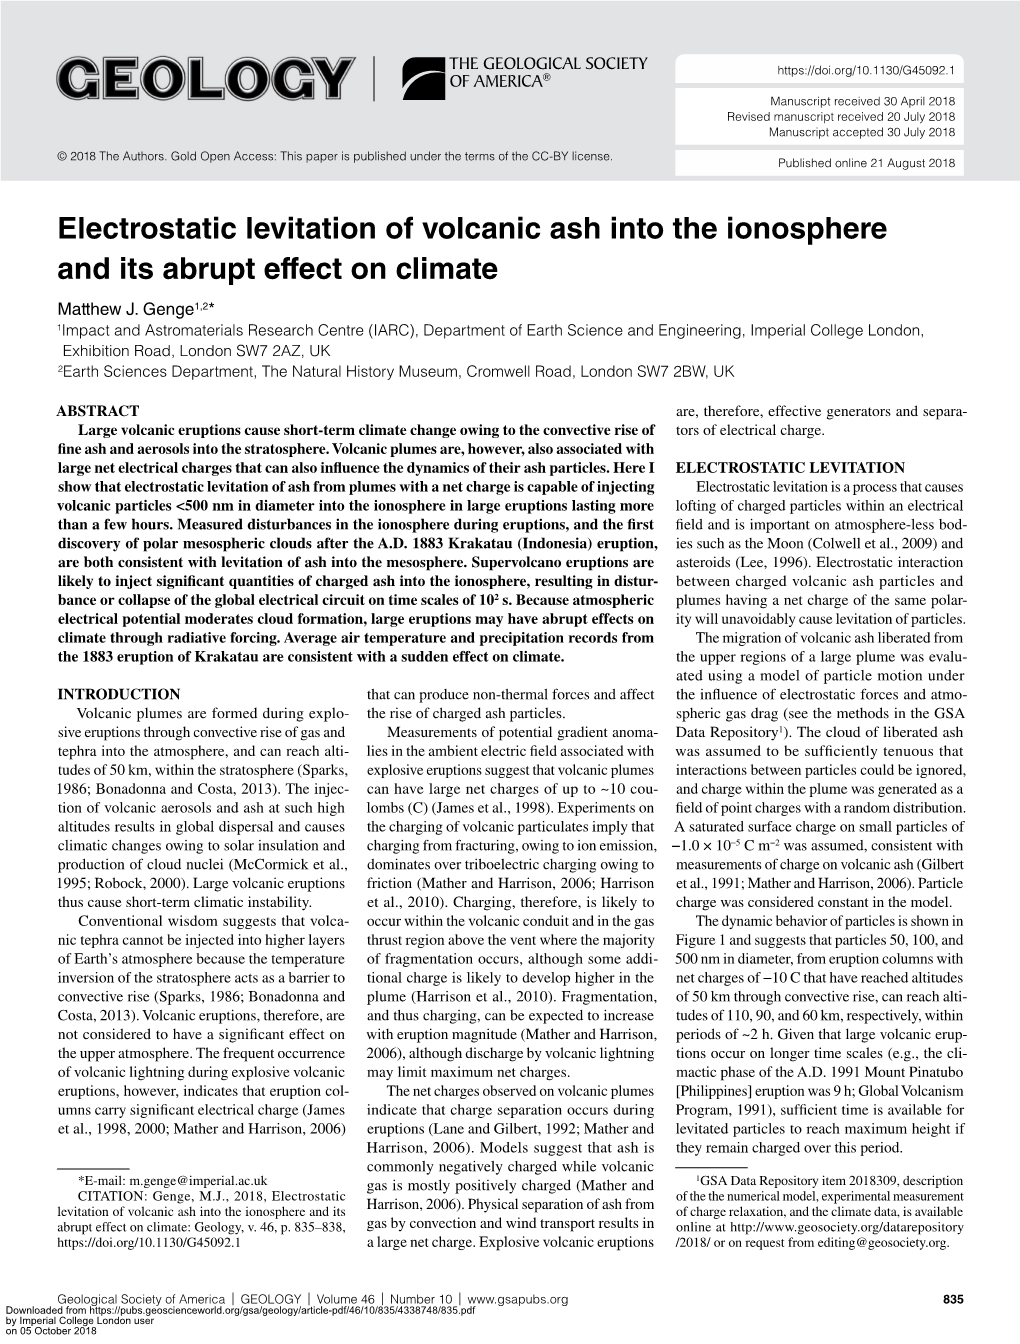 Electrostatic Levitation of Volcanic Ash Into the Ionosphere and Its Abrupt Effect on Climate Matthew J